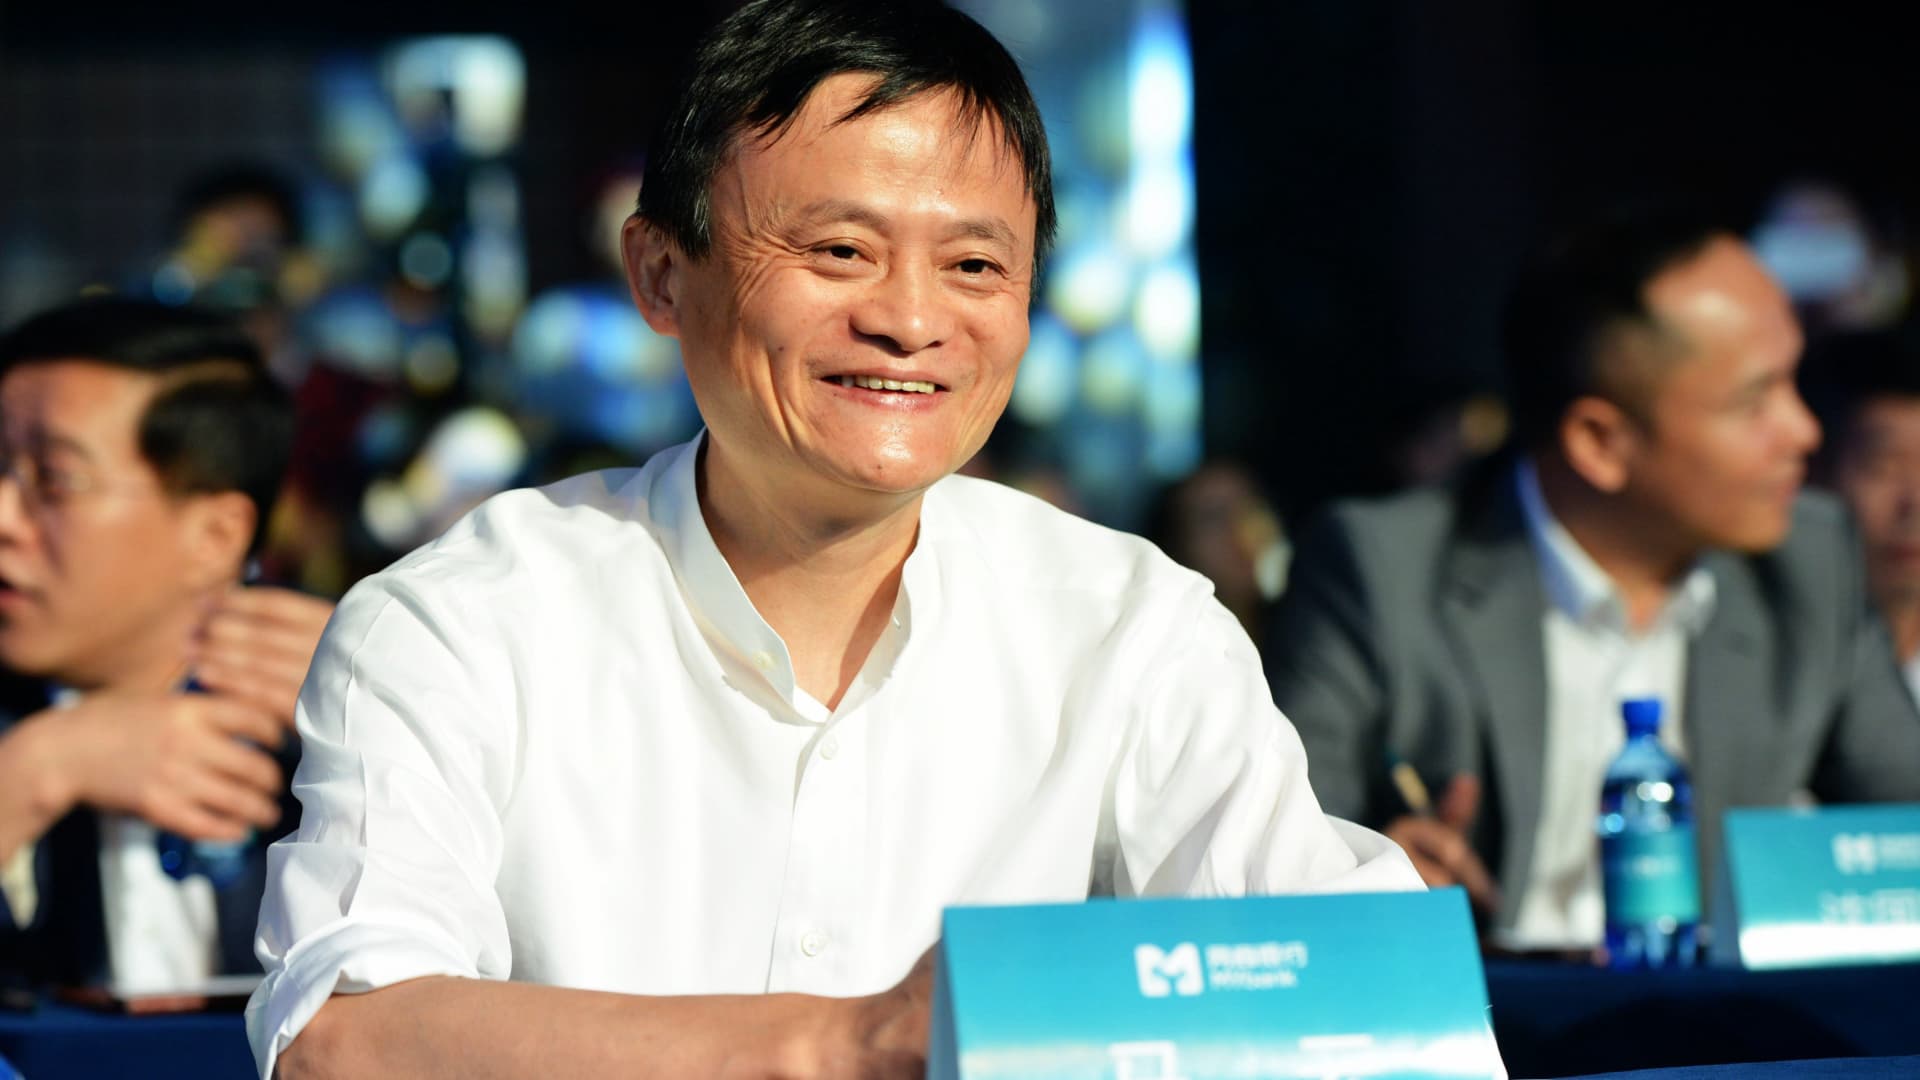 Alibaba founder Jack Ma back in China after months abroad in sign Beijing may be warming to tech